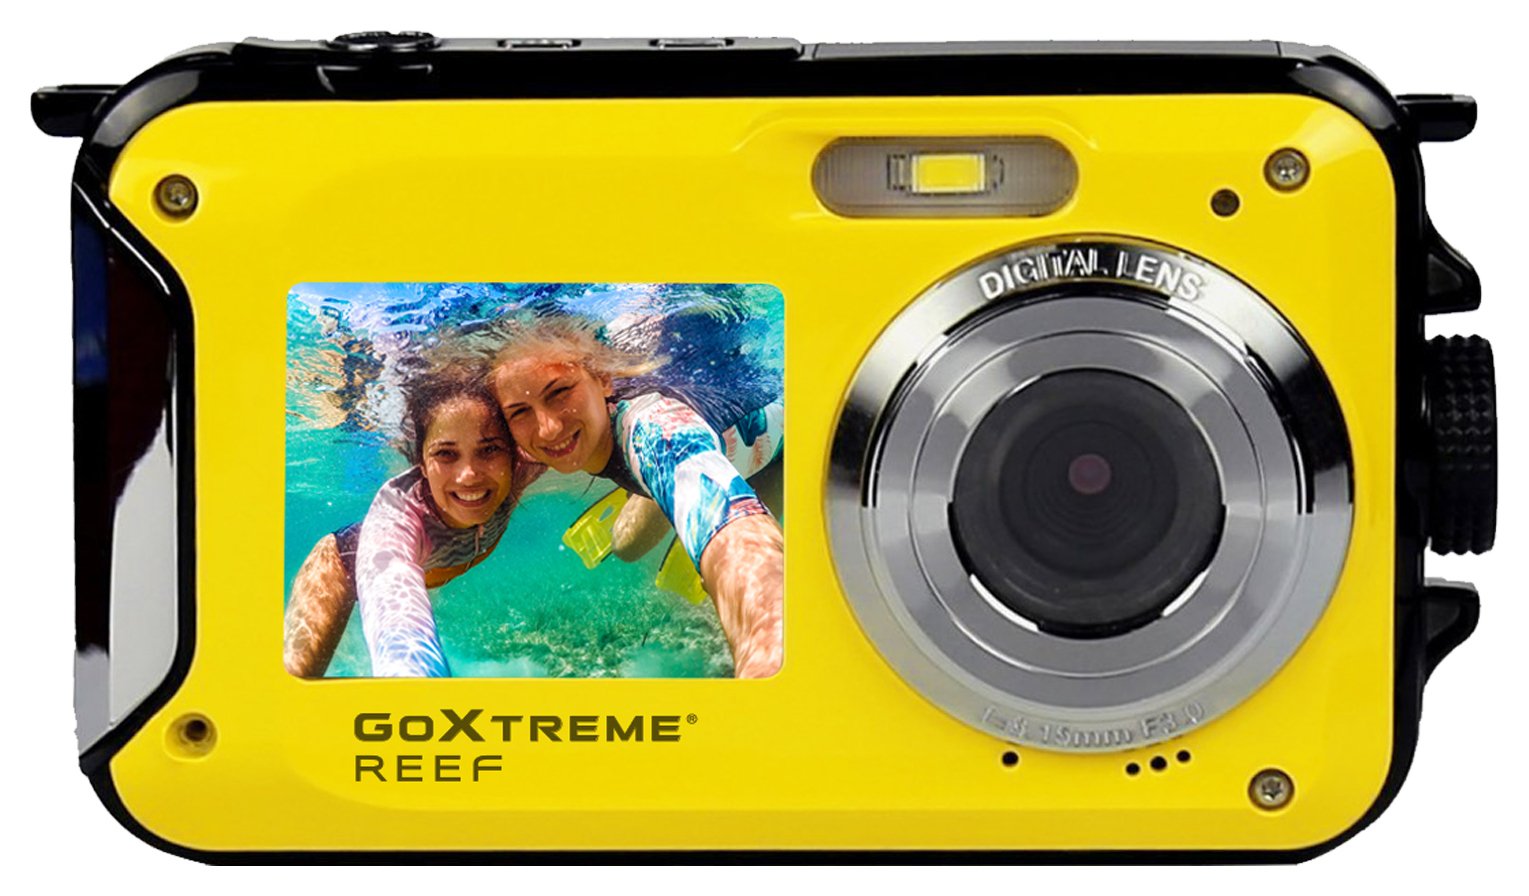 GoXtreme Reef 20MP 720P Waterproof Camera Review